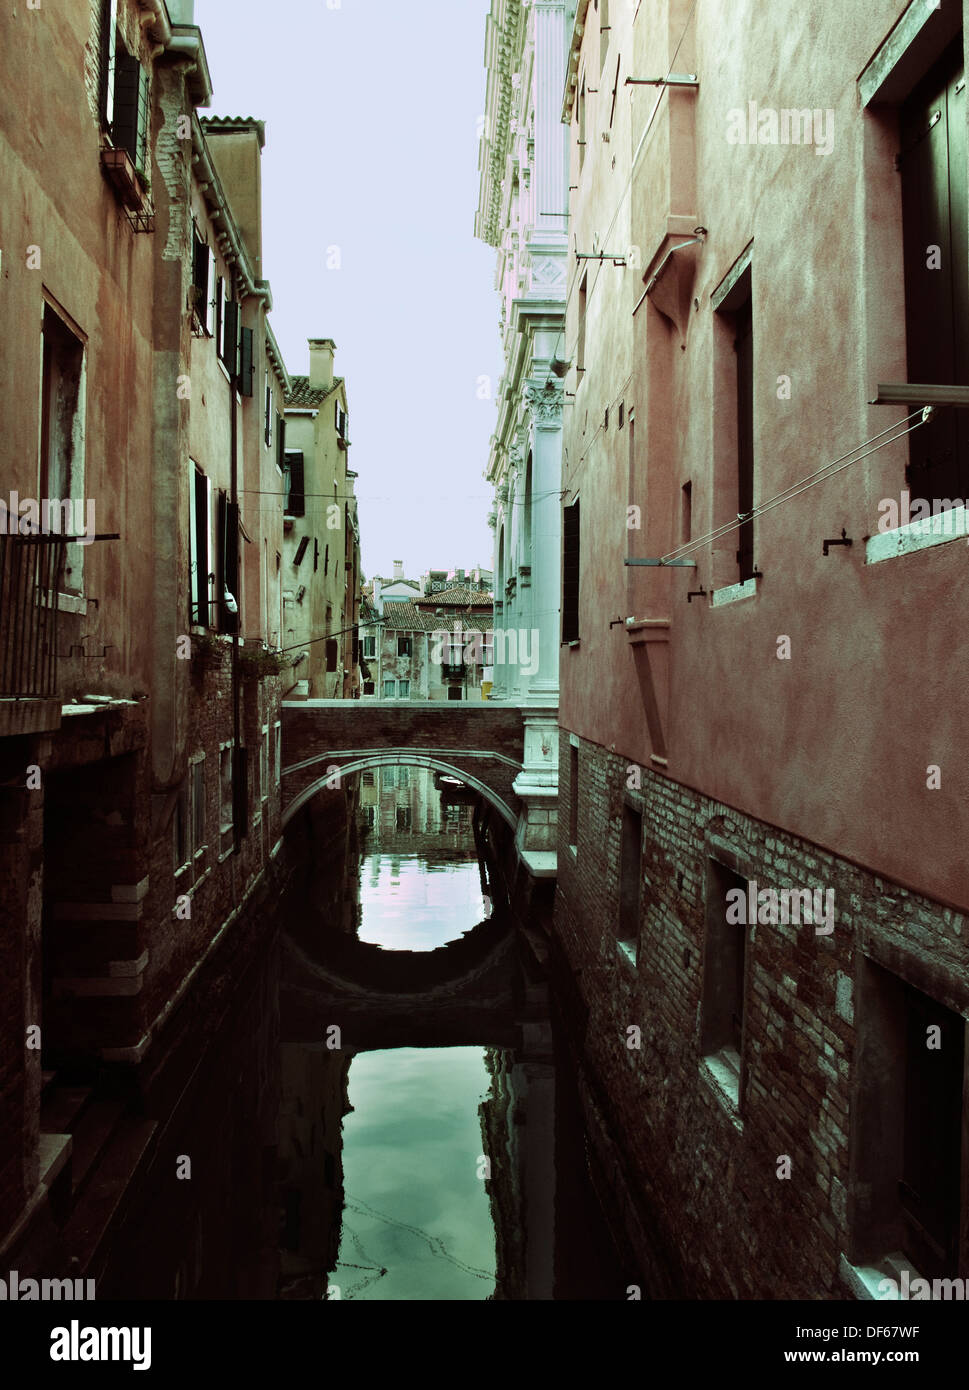 Narrow canal and small bridge between houses, Venice, Italy, cross processed Stock Photo